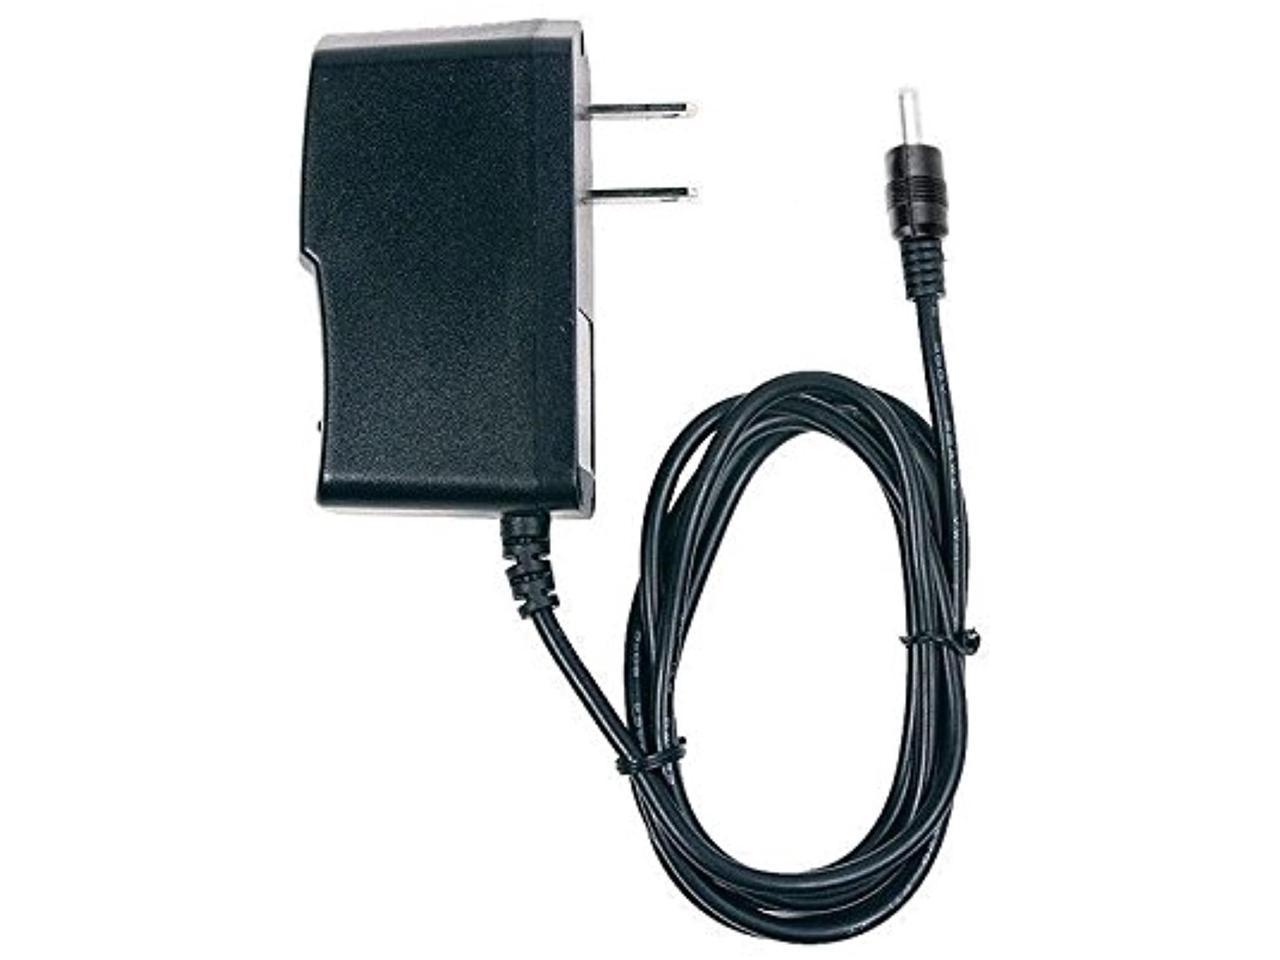 PK Power 4-Pin 220W AC Adapter Charger Compatible with Puget Systems Traverse Pro M740i M750i M760i M760u 17